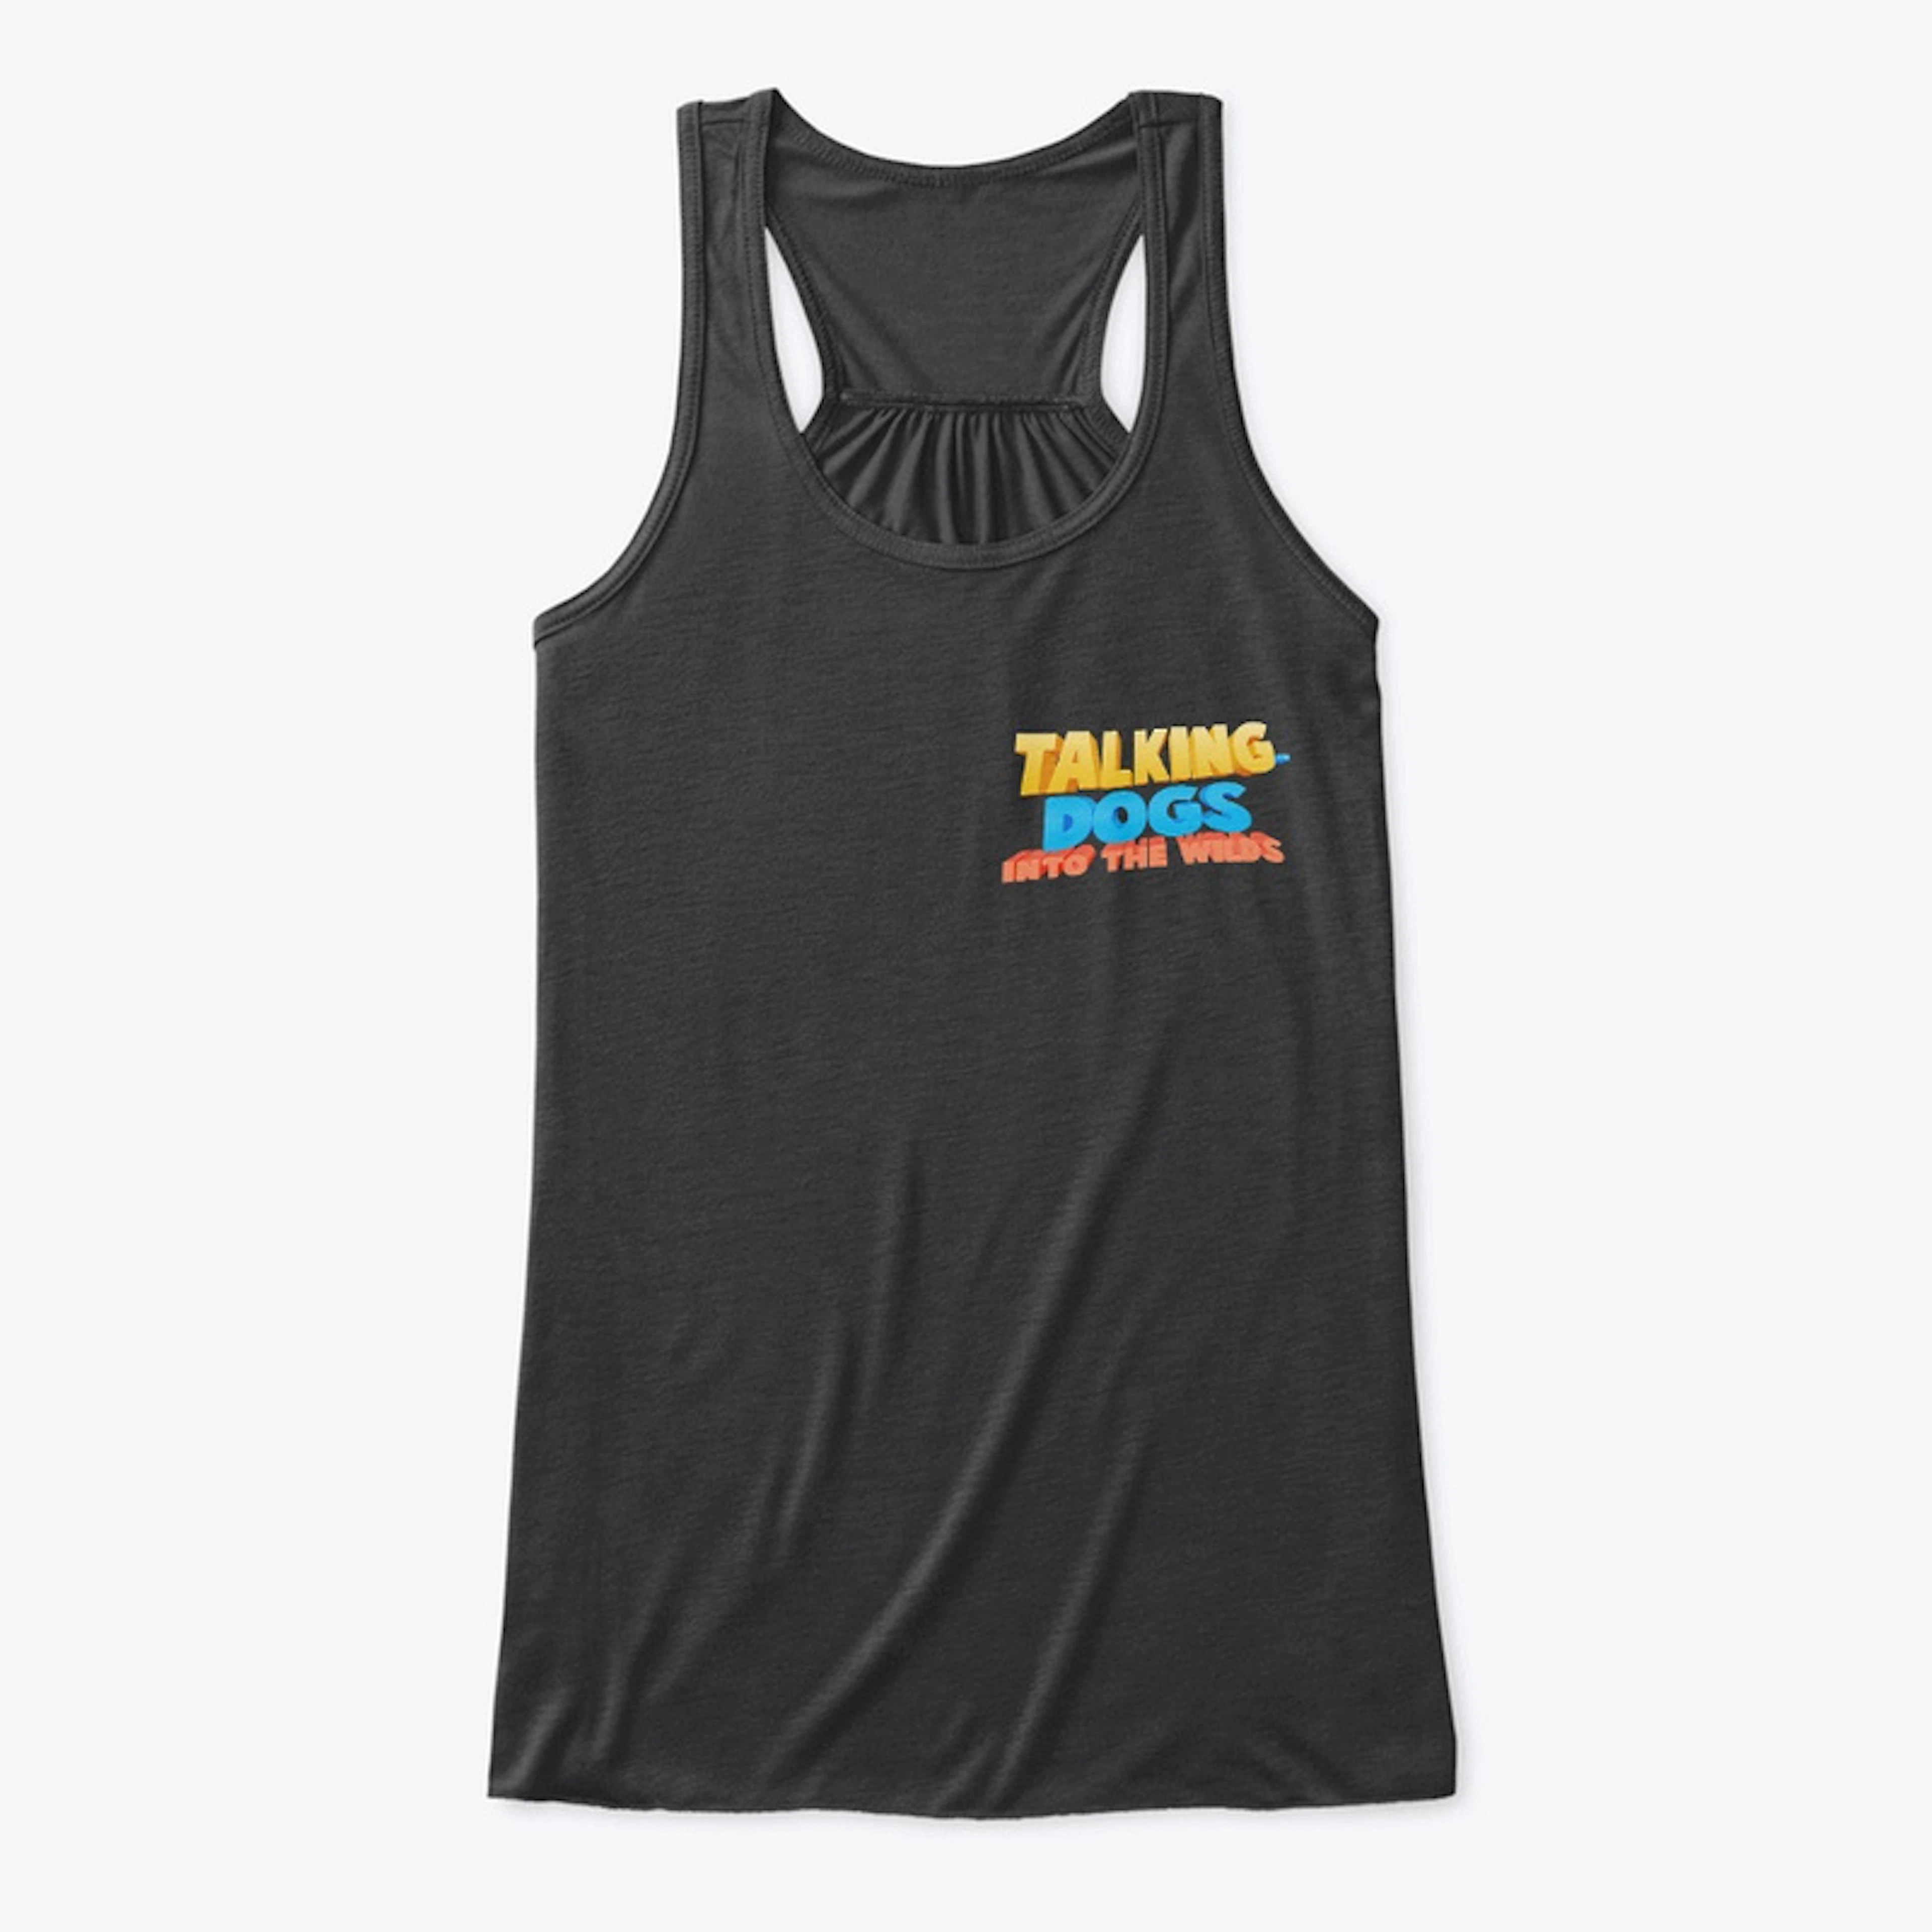 Talking Dogs: Into The Wilds Logo Merch